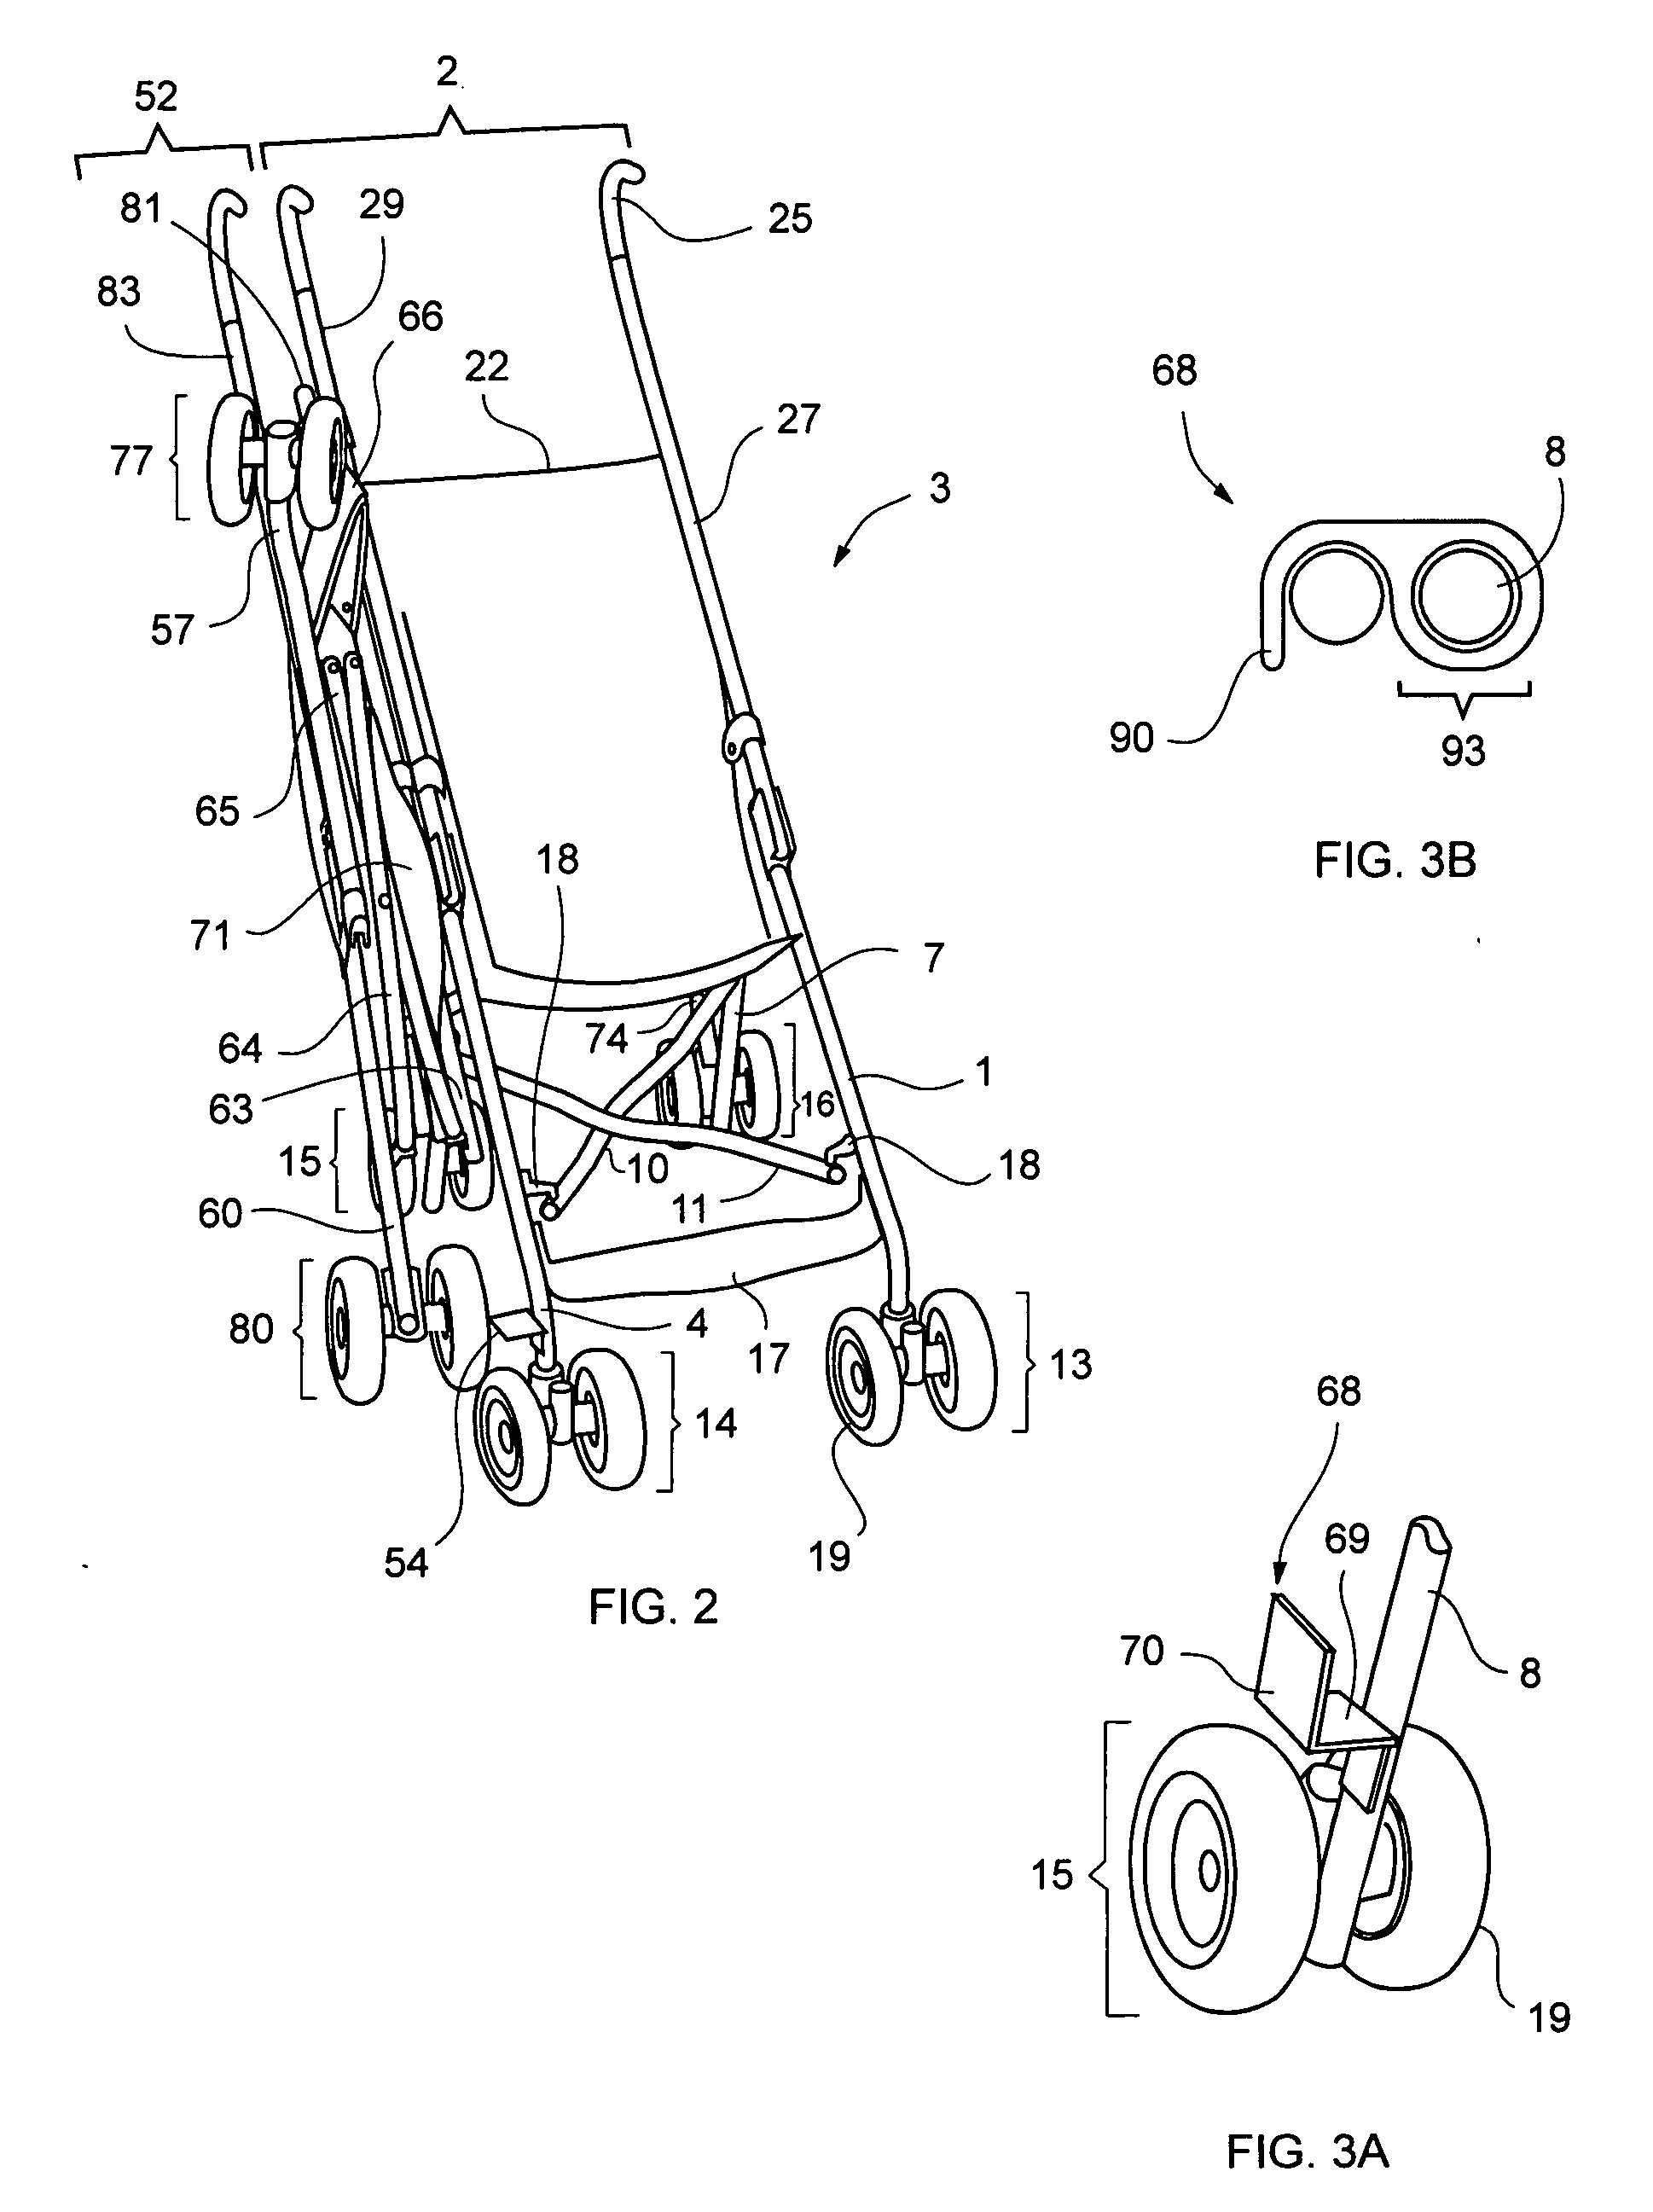 Convertible dual stroller and methods therefor